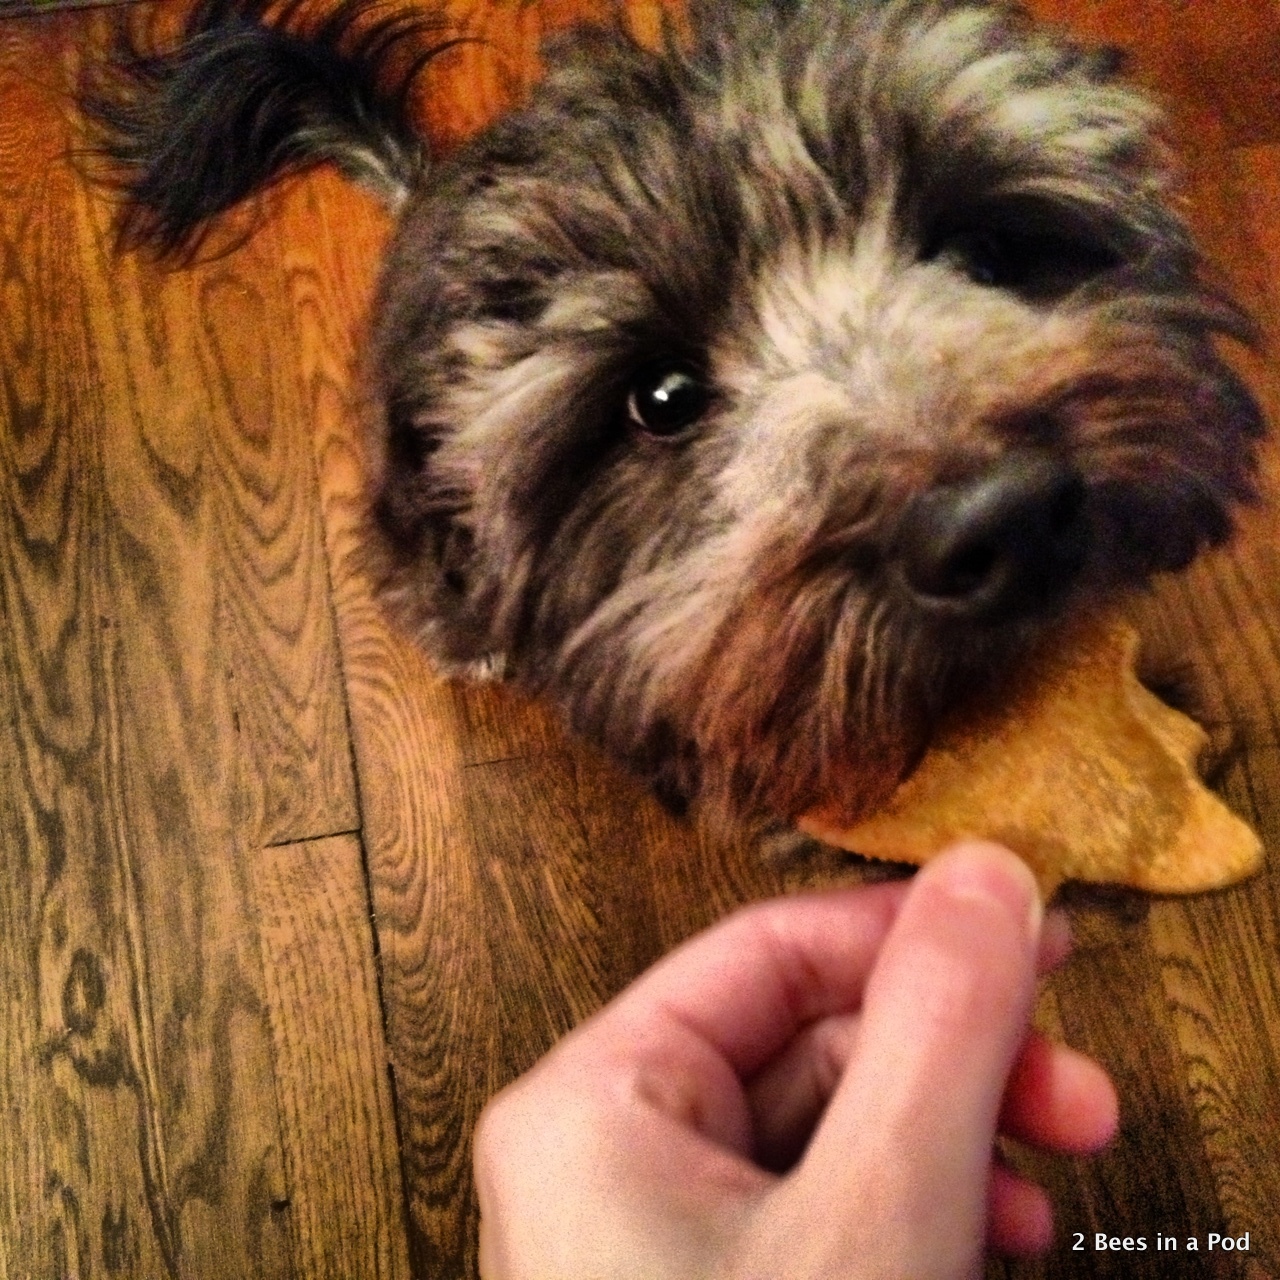 1-I think someone likes his homemade dog treat with pumpkin & peanut butter